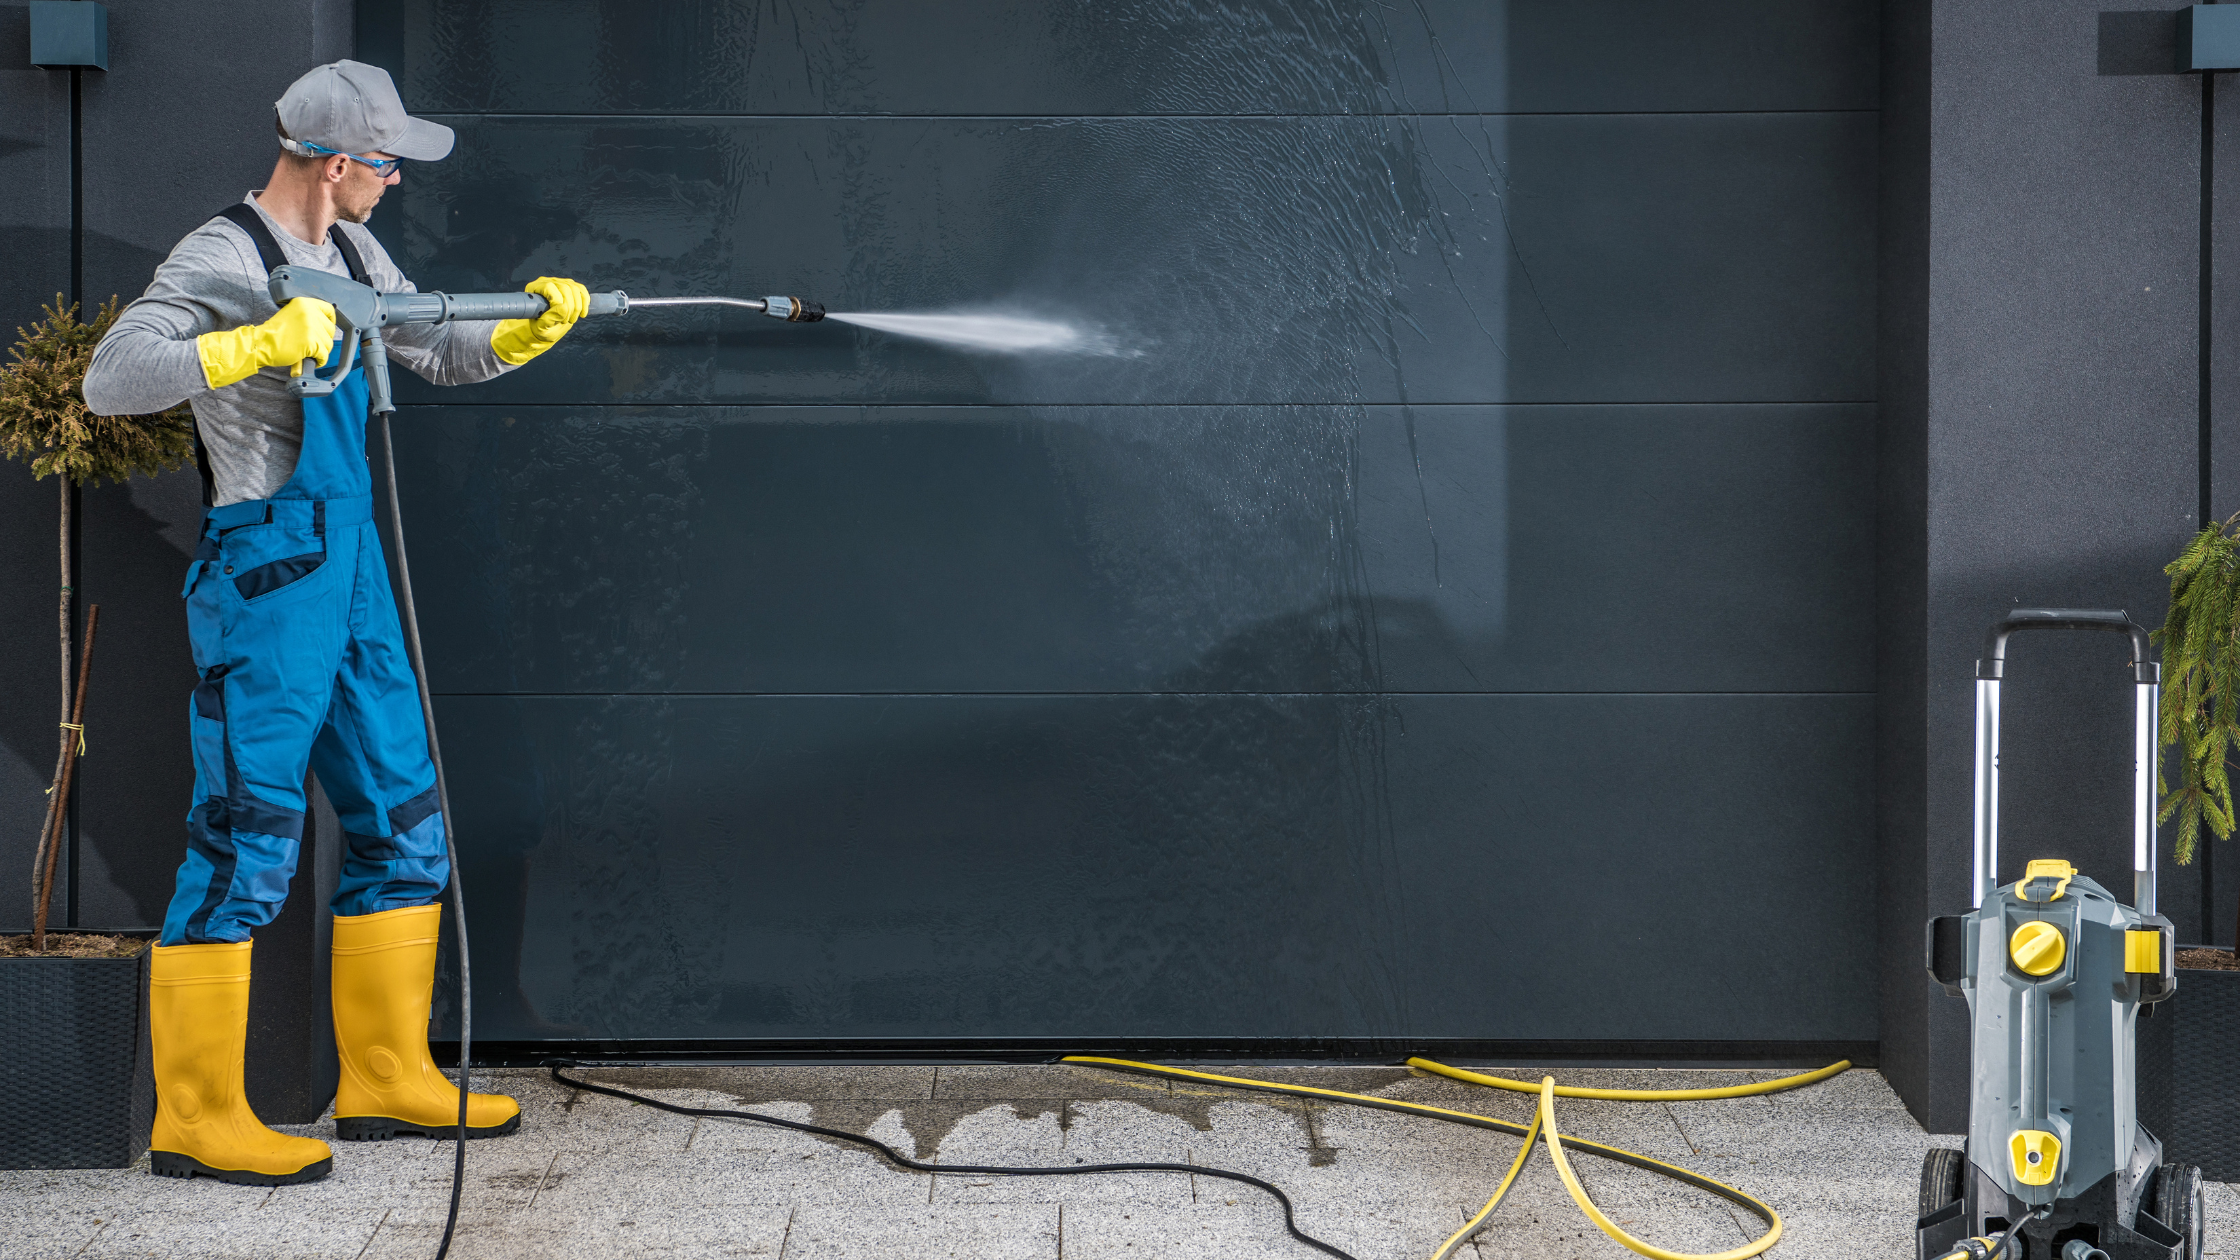 Pressure Washing Like a Pro: A Step-by-Step Guide to Safely Clean Your House